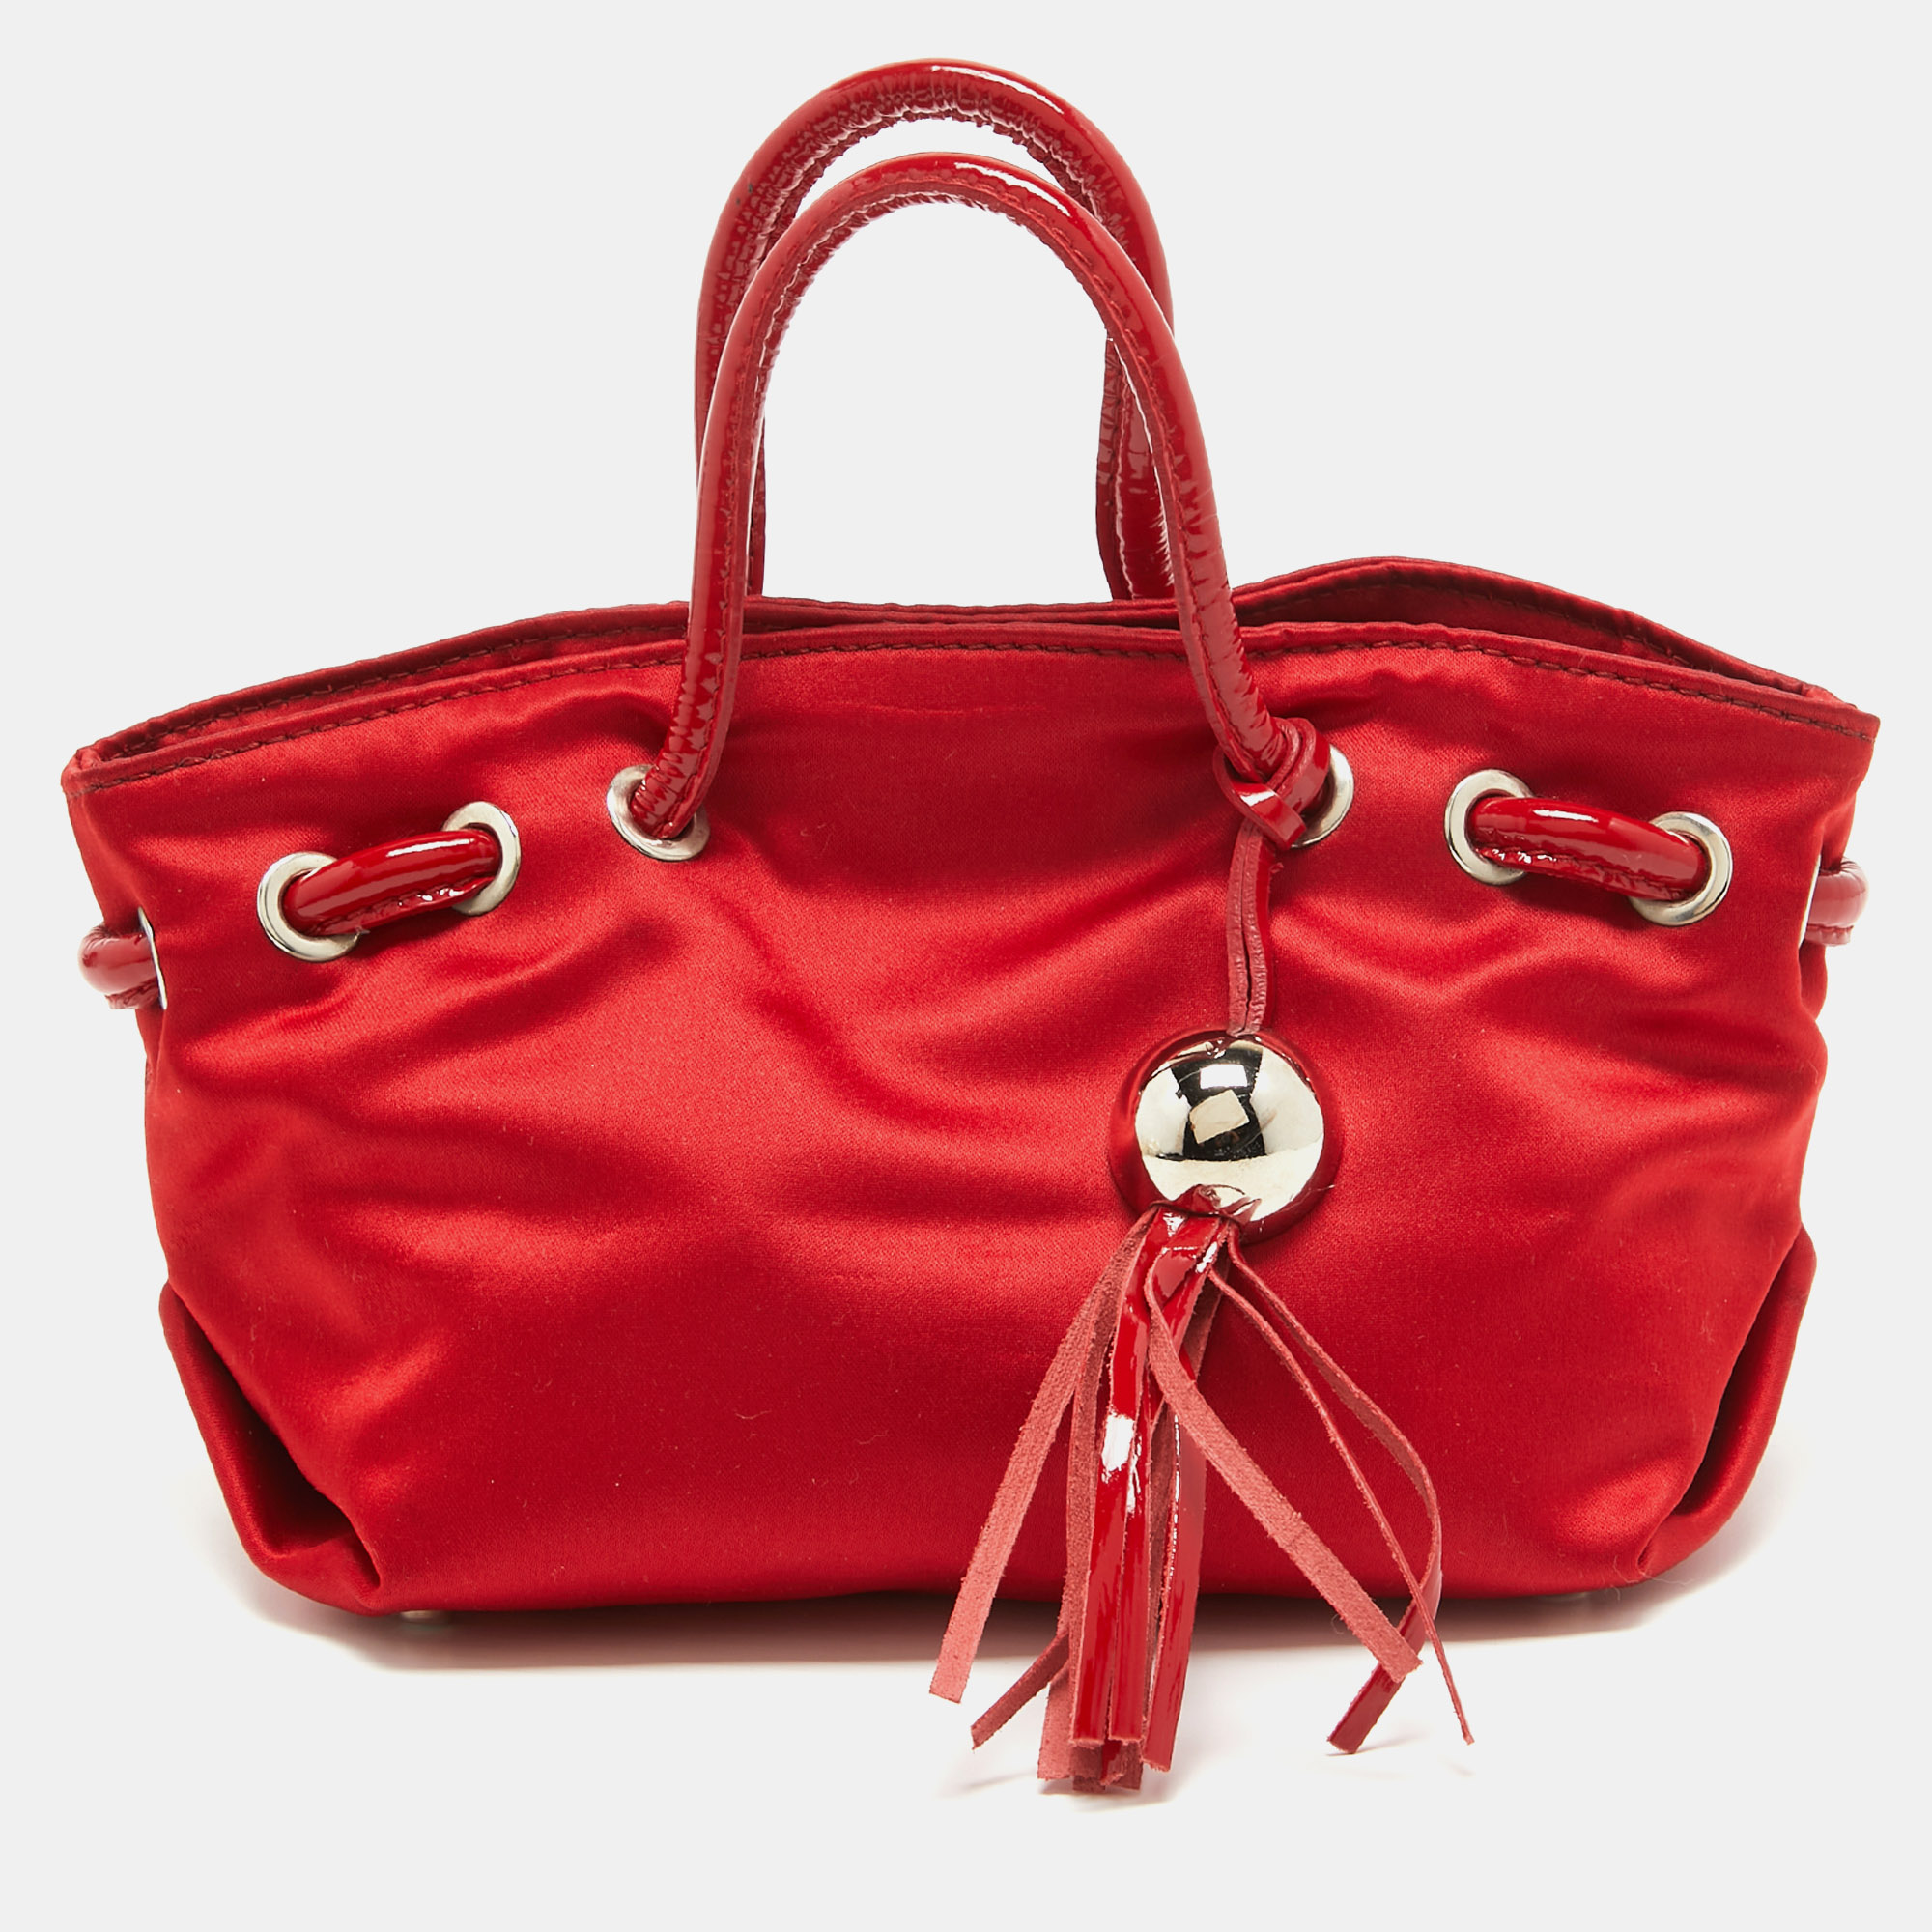 

Furla Red Satin and Patent Leather Baguette Bag